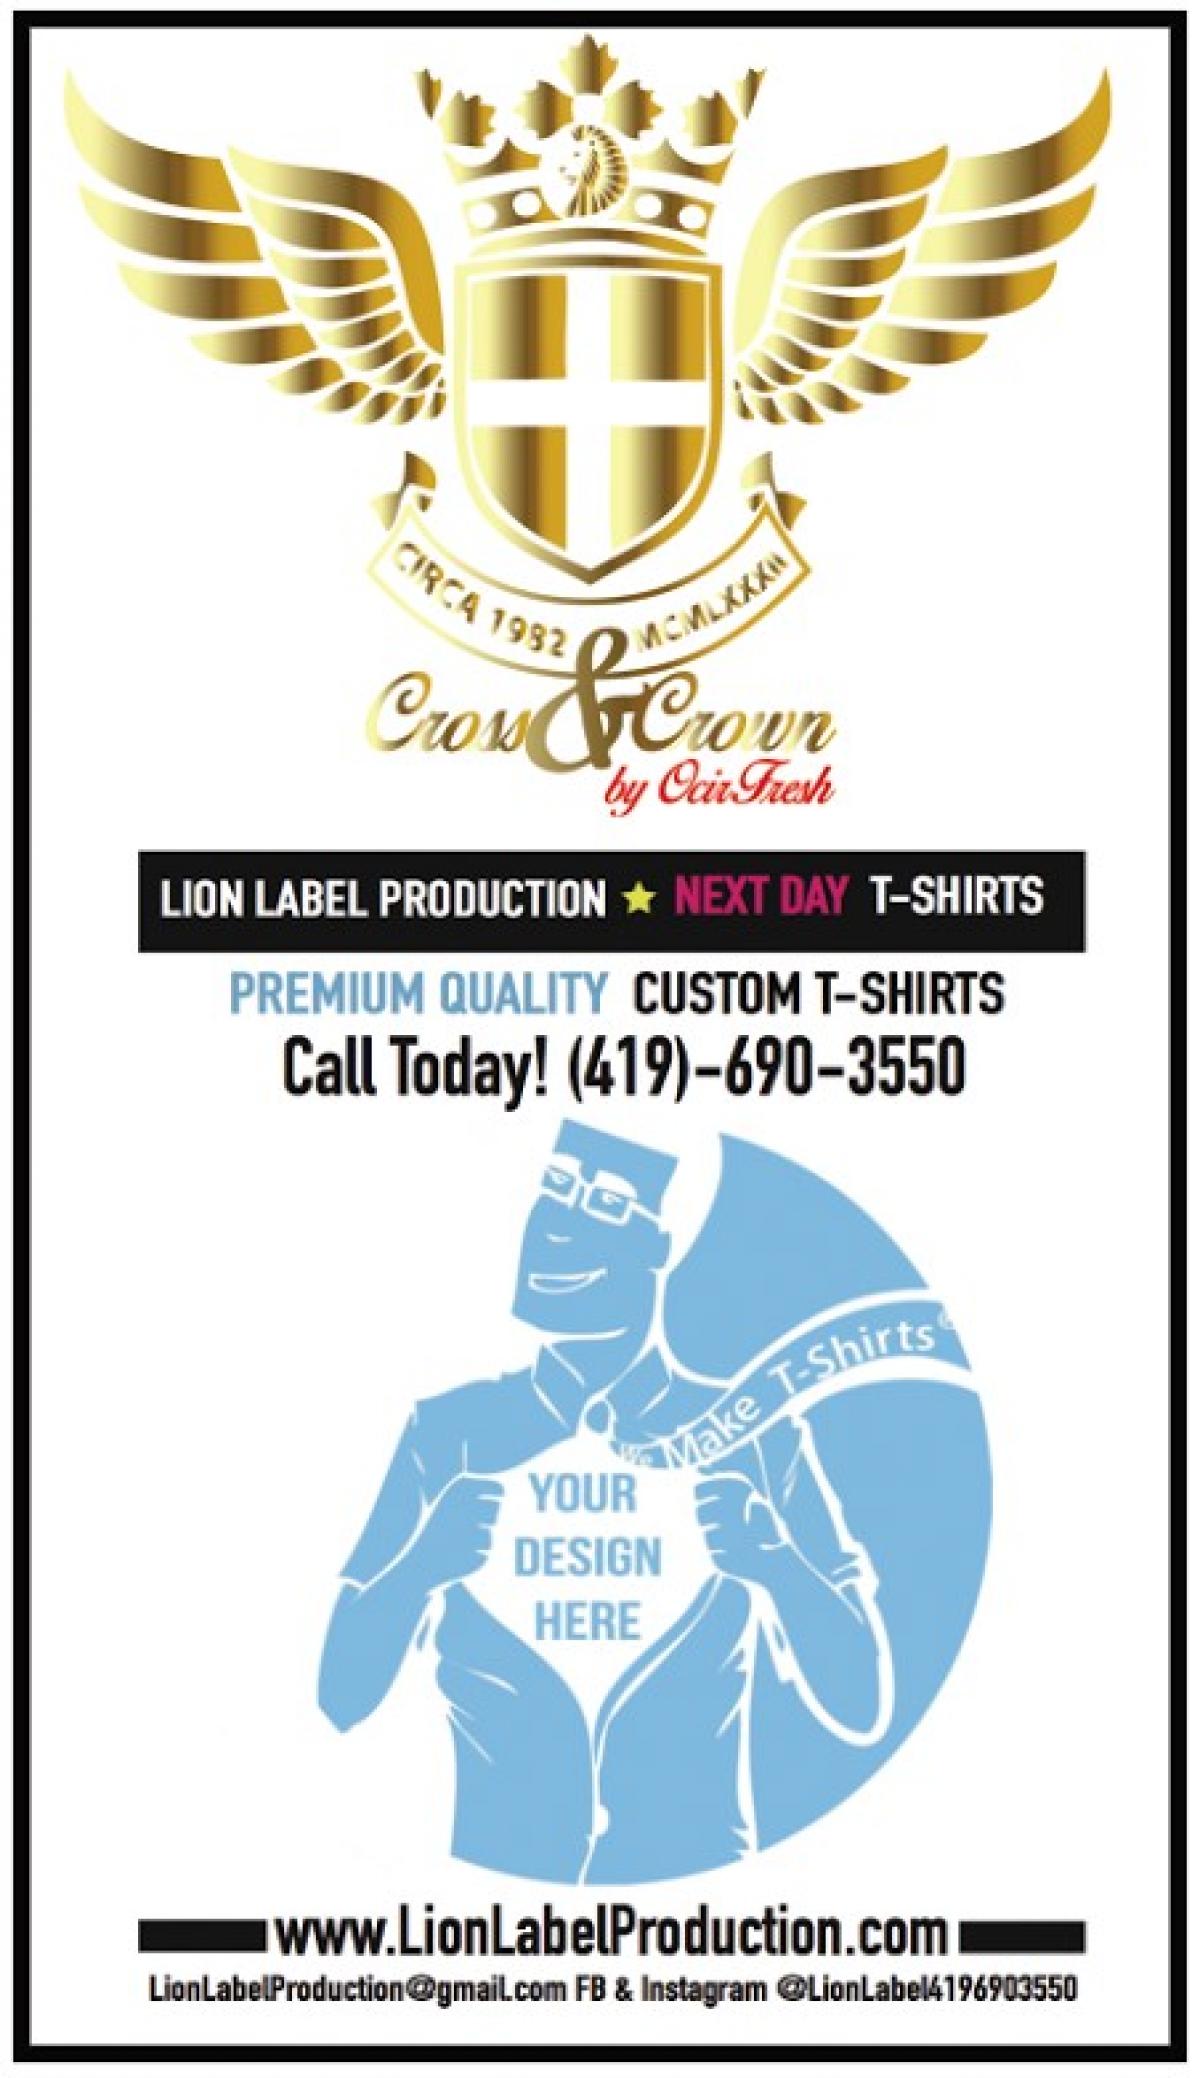 Cross&Crown Brand and Lion Label Production Custom T-Shirts Join the Toledo Threat Family